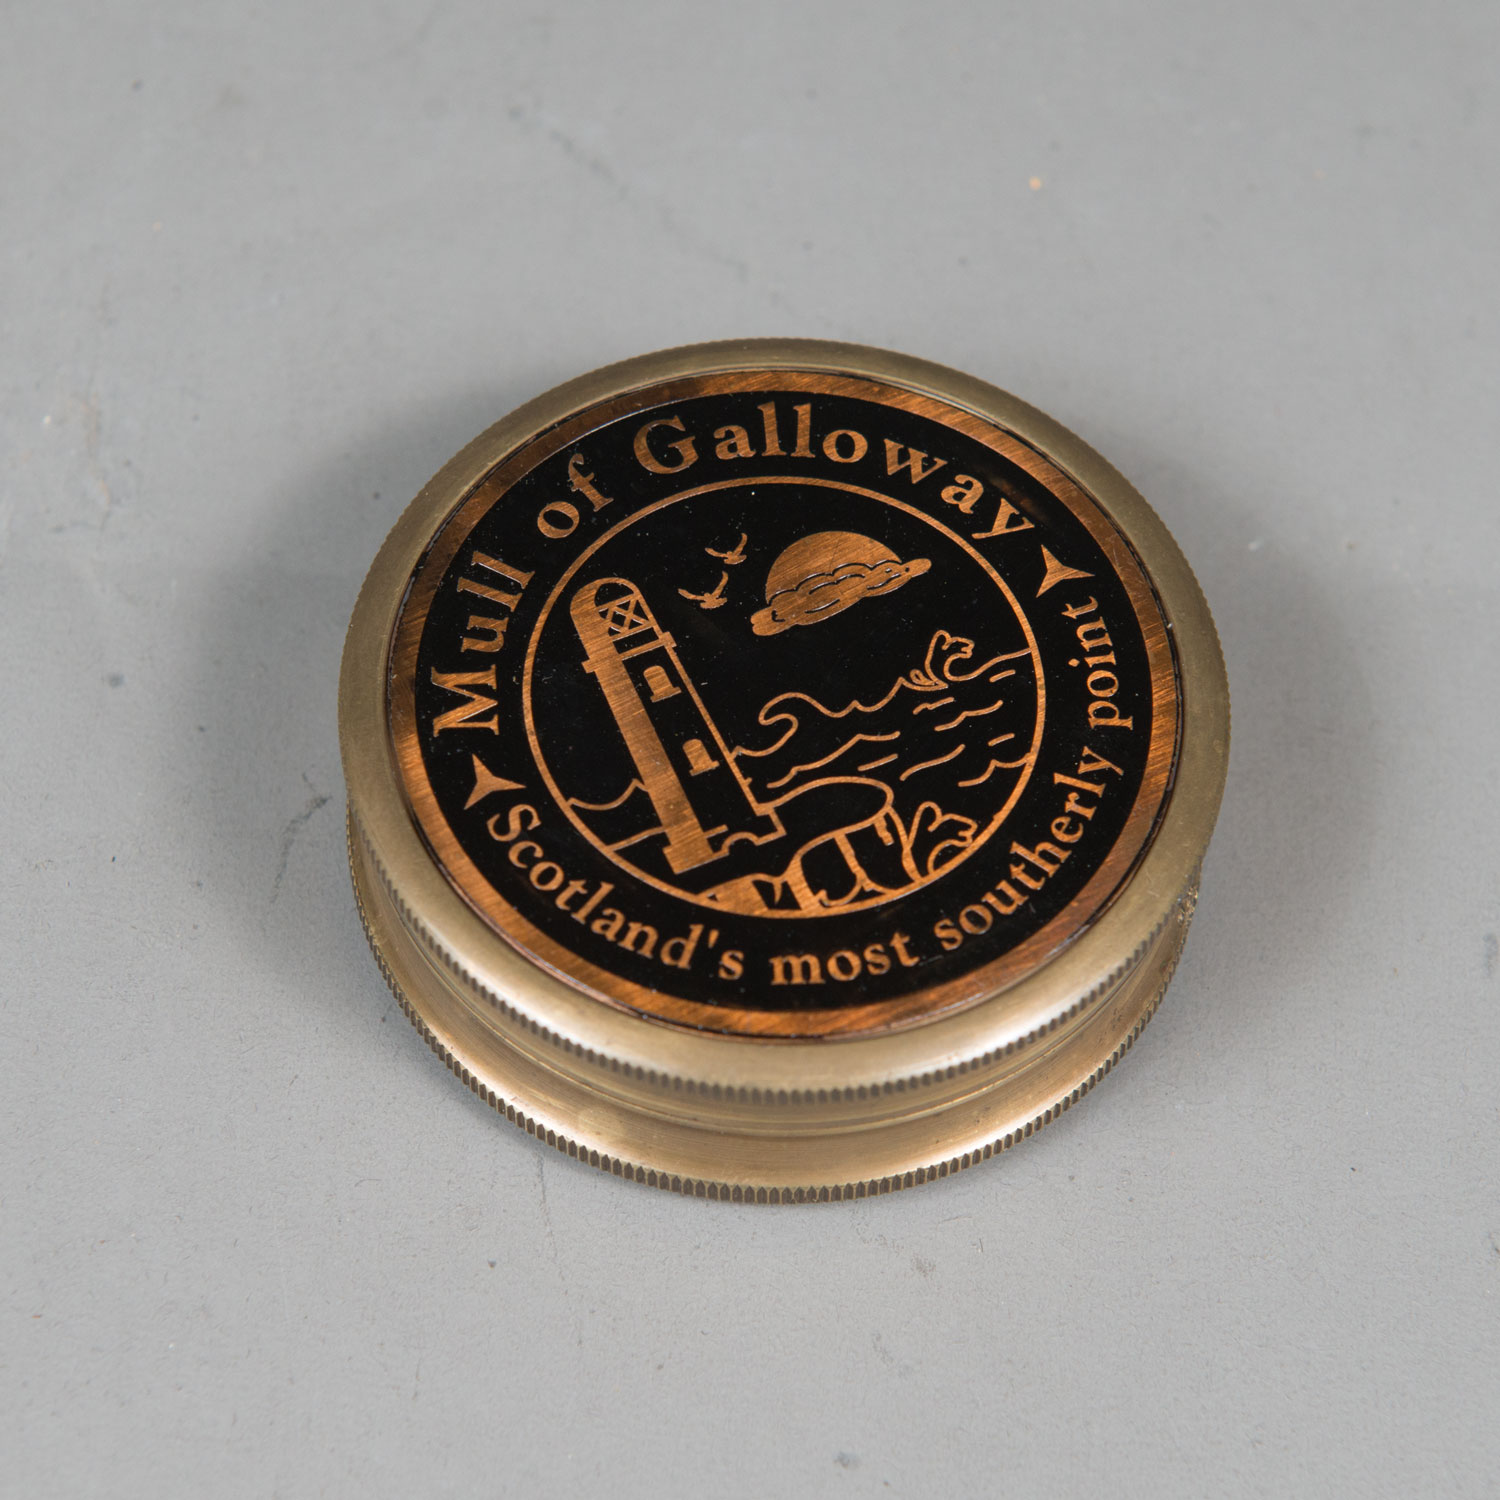 Mull of Galloway Compass - Image 2 of 3